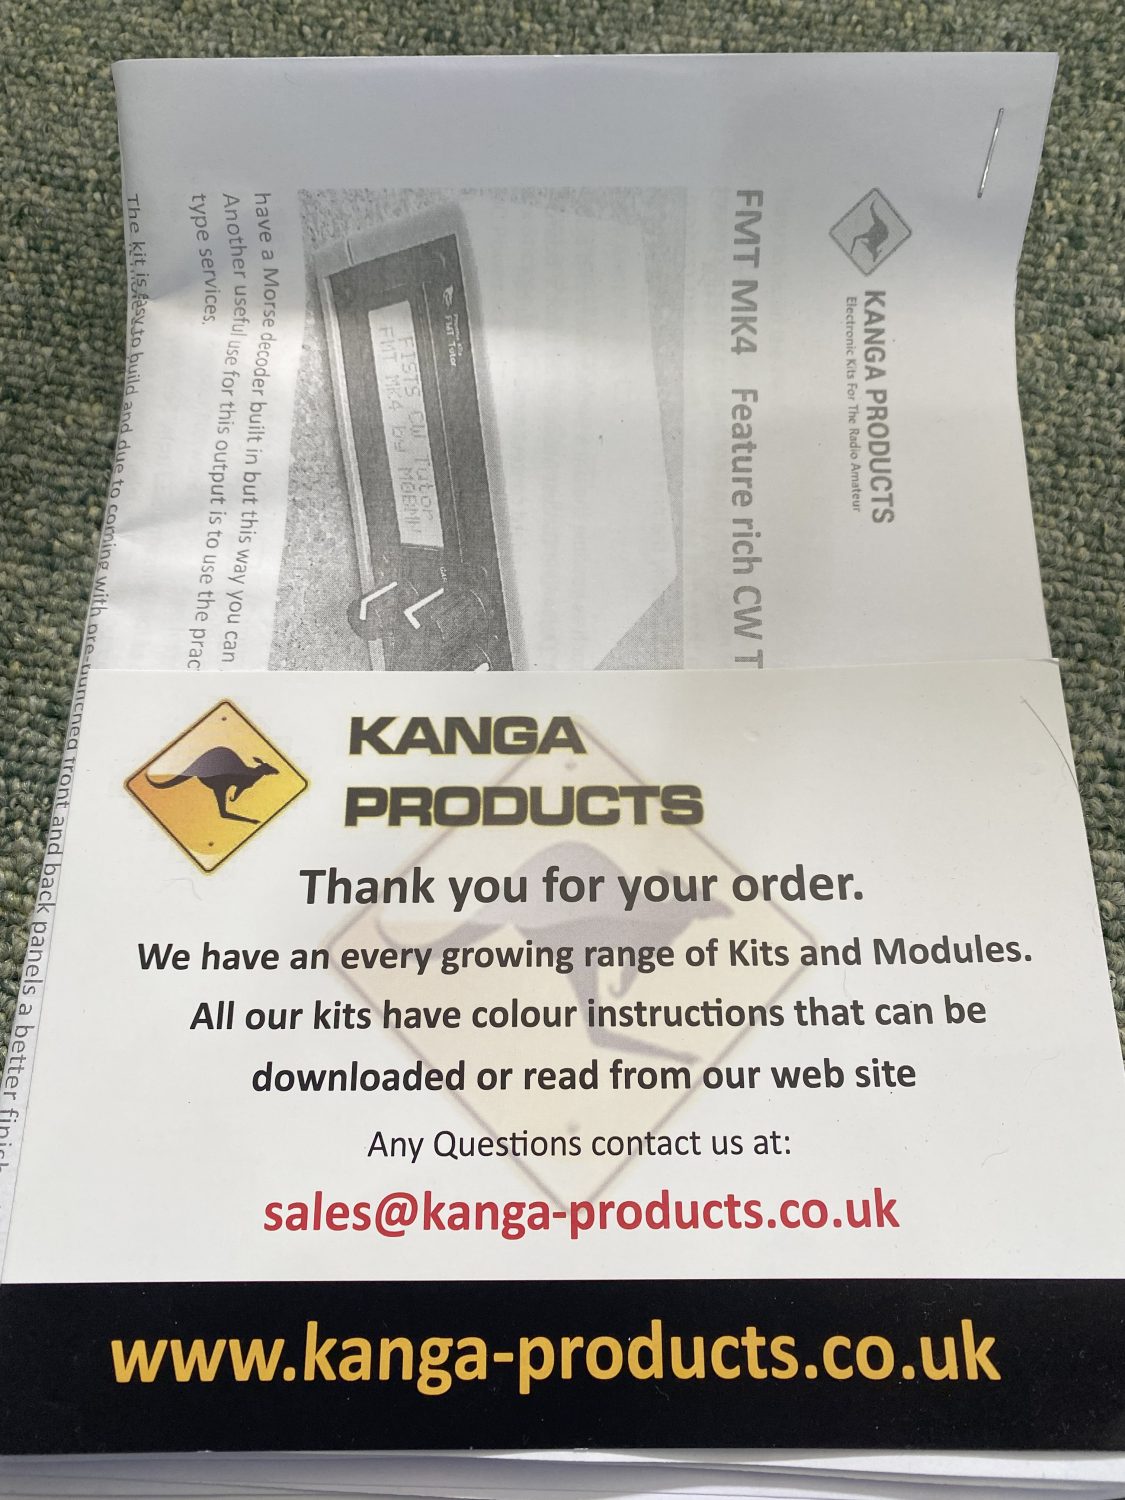 The supplied documentation from Kanga Products for the FMT Mk4 CW Trainer.